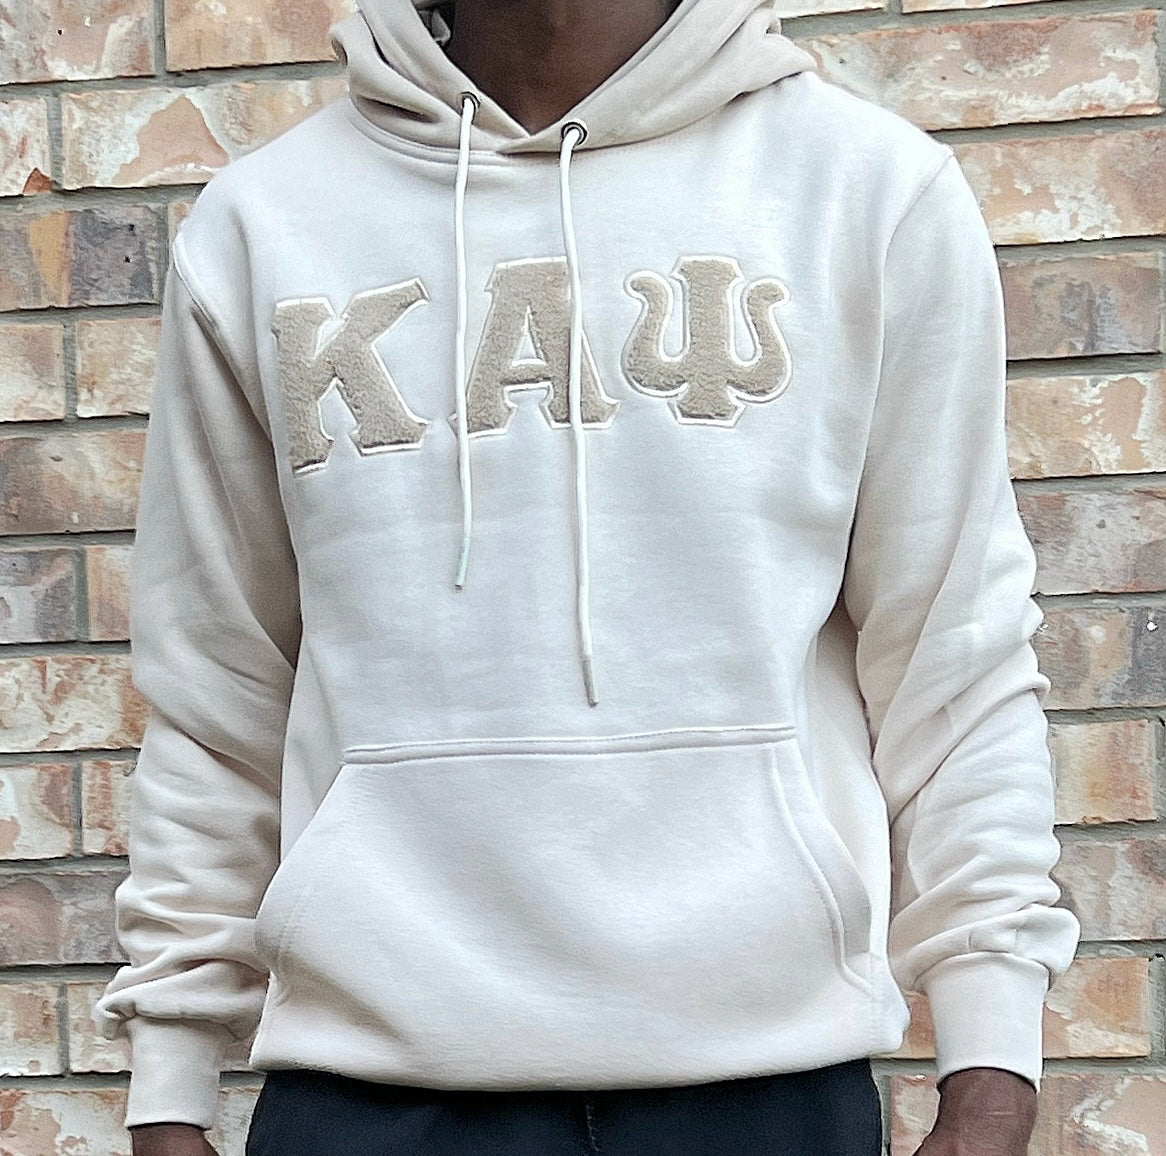 Exclusive Kappa Alpha Psi Chenille Embroidery Lettered Hoodie. This is the perfect long-sleeved hoodie to wear while showing off your Kappa Alpha Psi fraternity lettering. A comfortable 100% cotton tee with a twill Greek letters embroidery across the chest give you the perfect fit. This hoodie is also a perfect gift or your favorite Kappa Man.